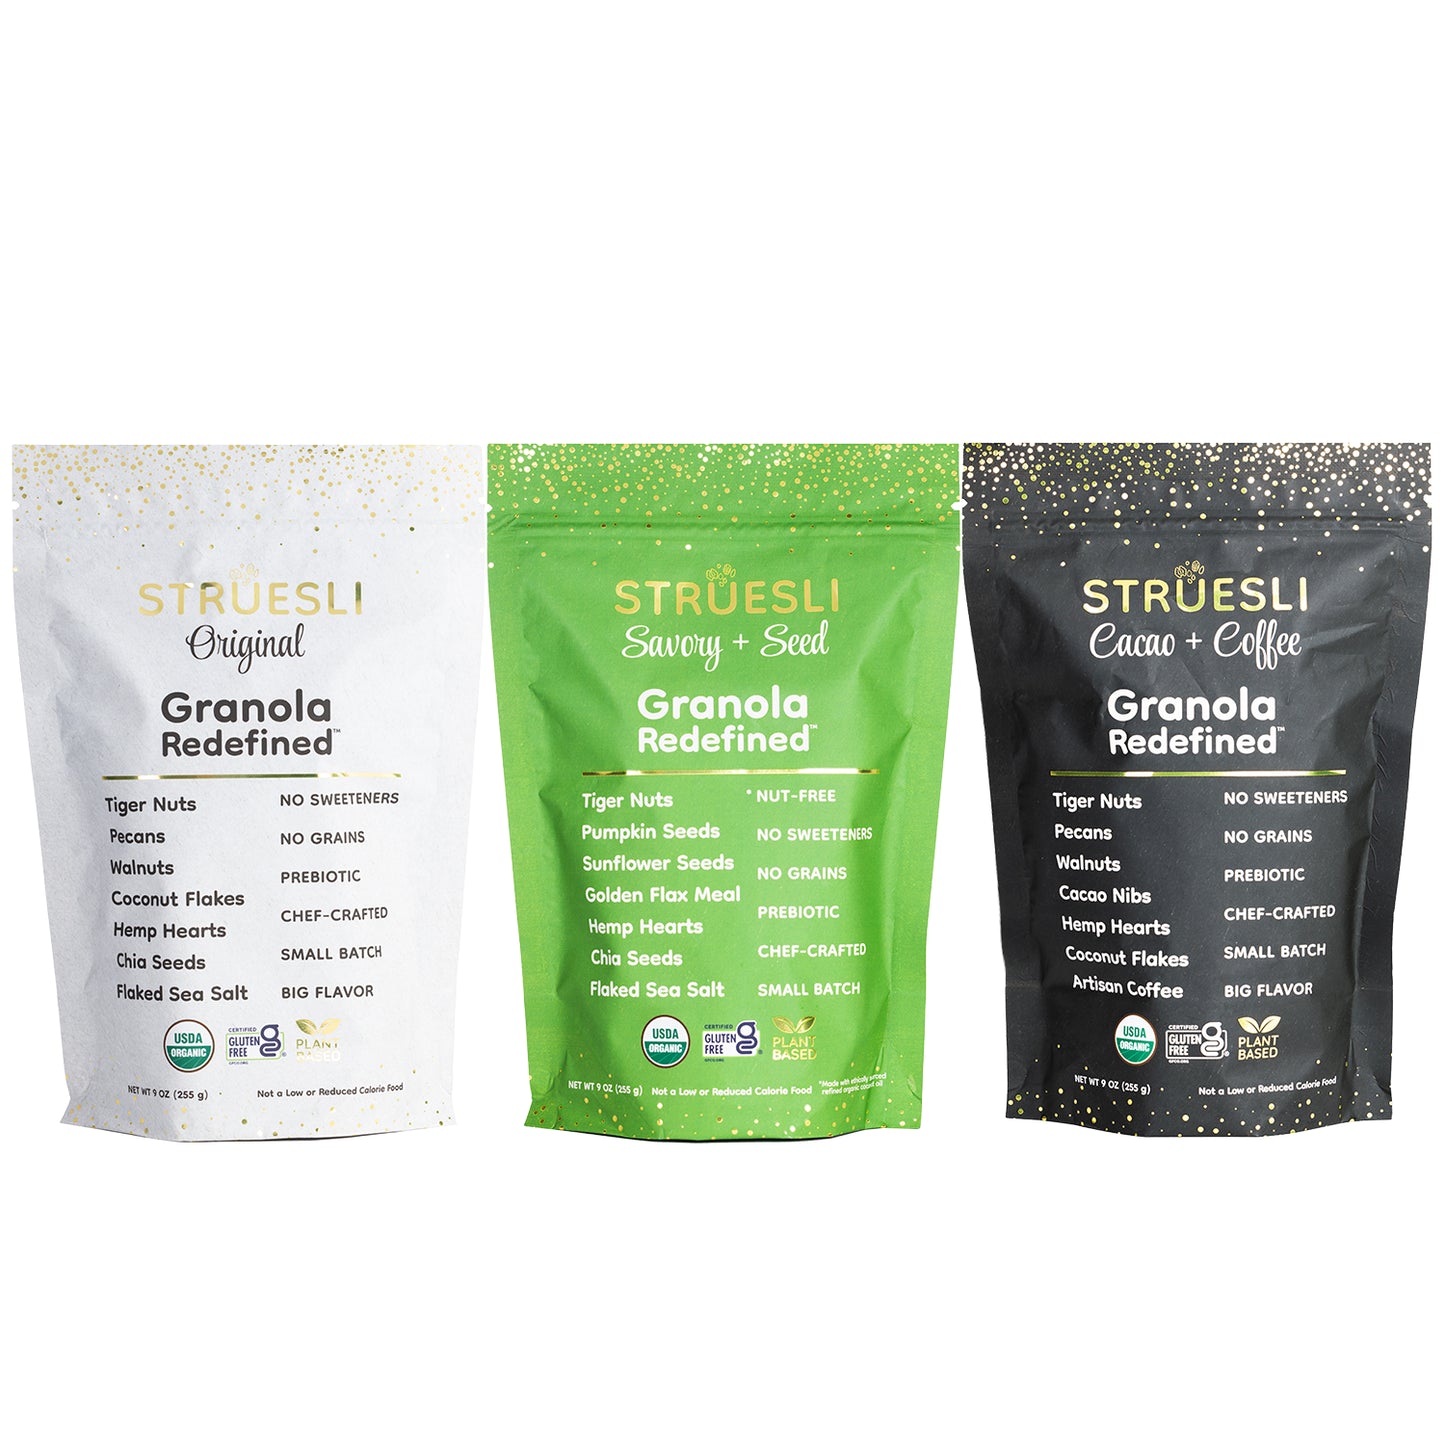 Packages of Struesli Origina, Savory + Seed, and Cacao + Coffee